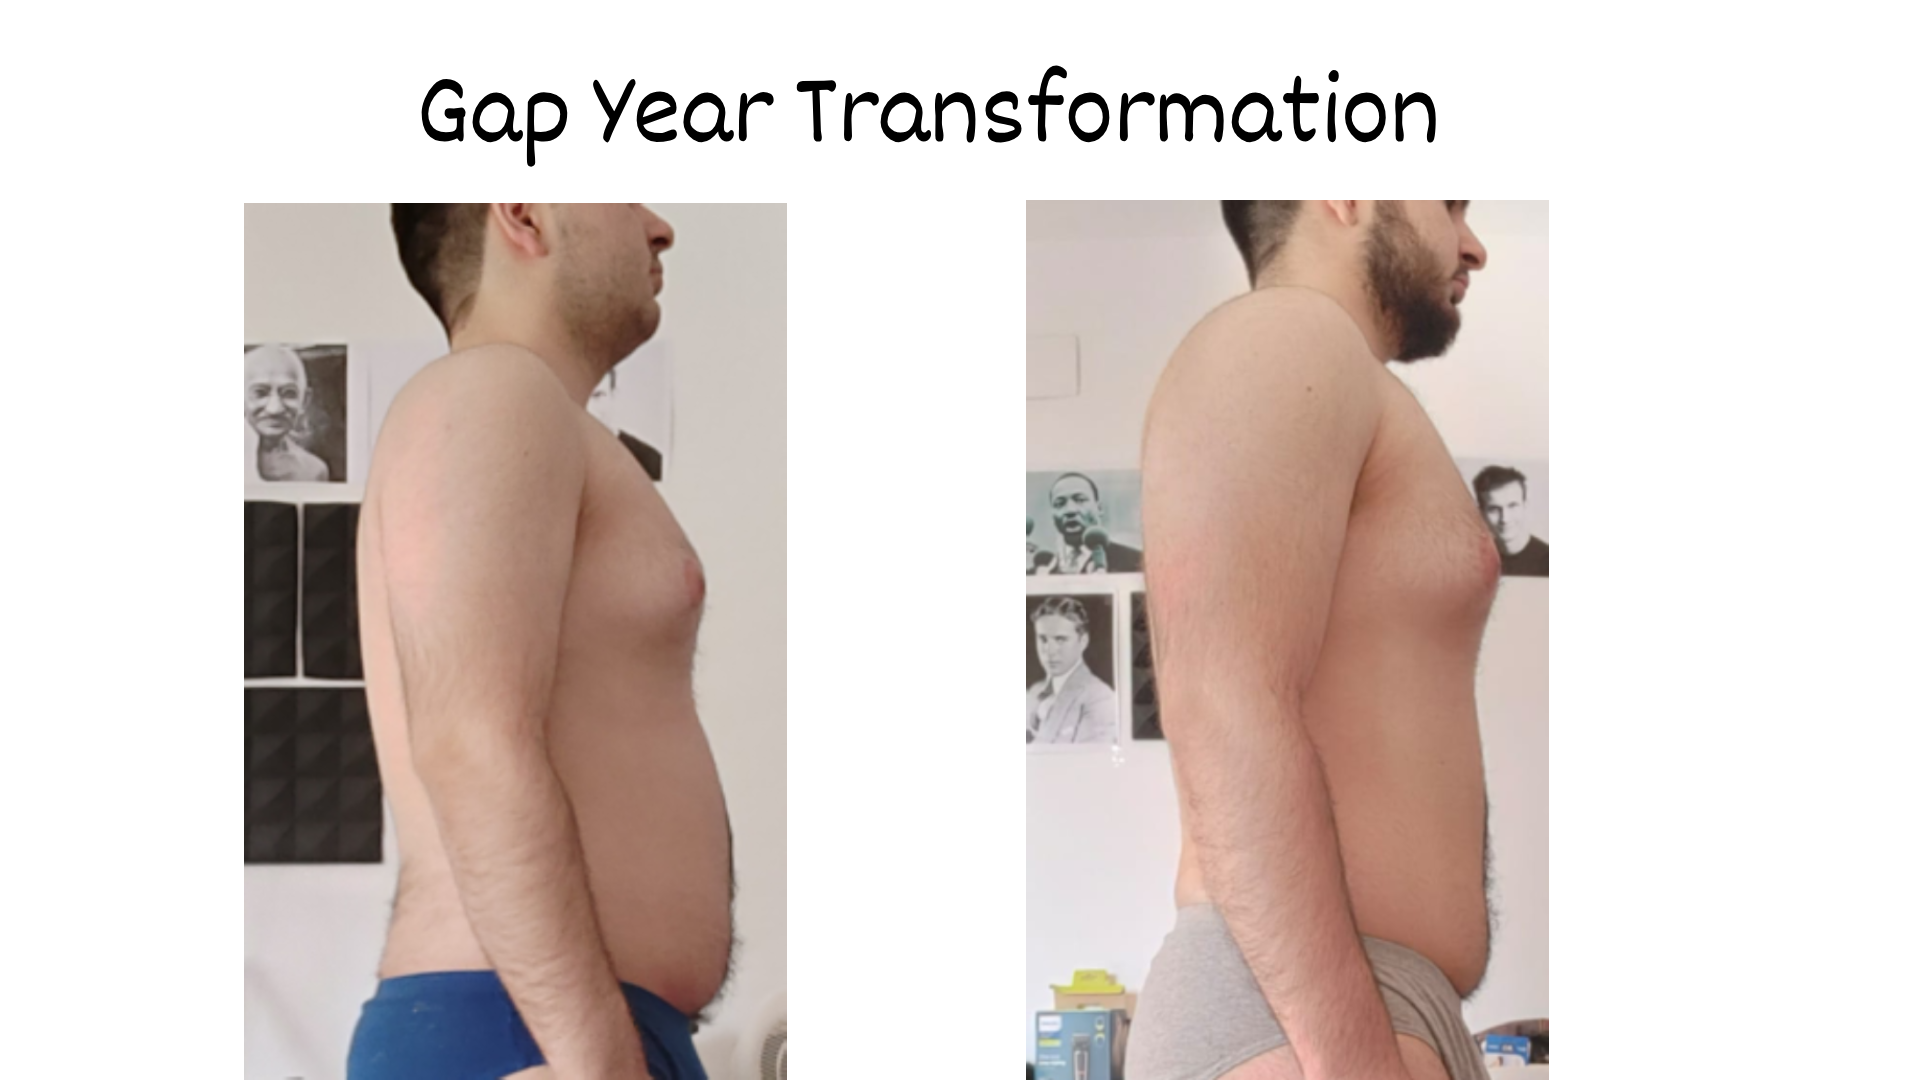 My weight loss transformation in my gap year - image